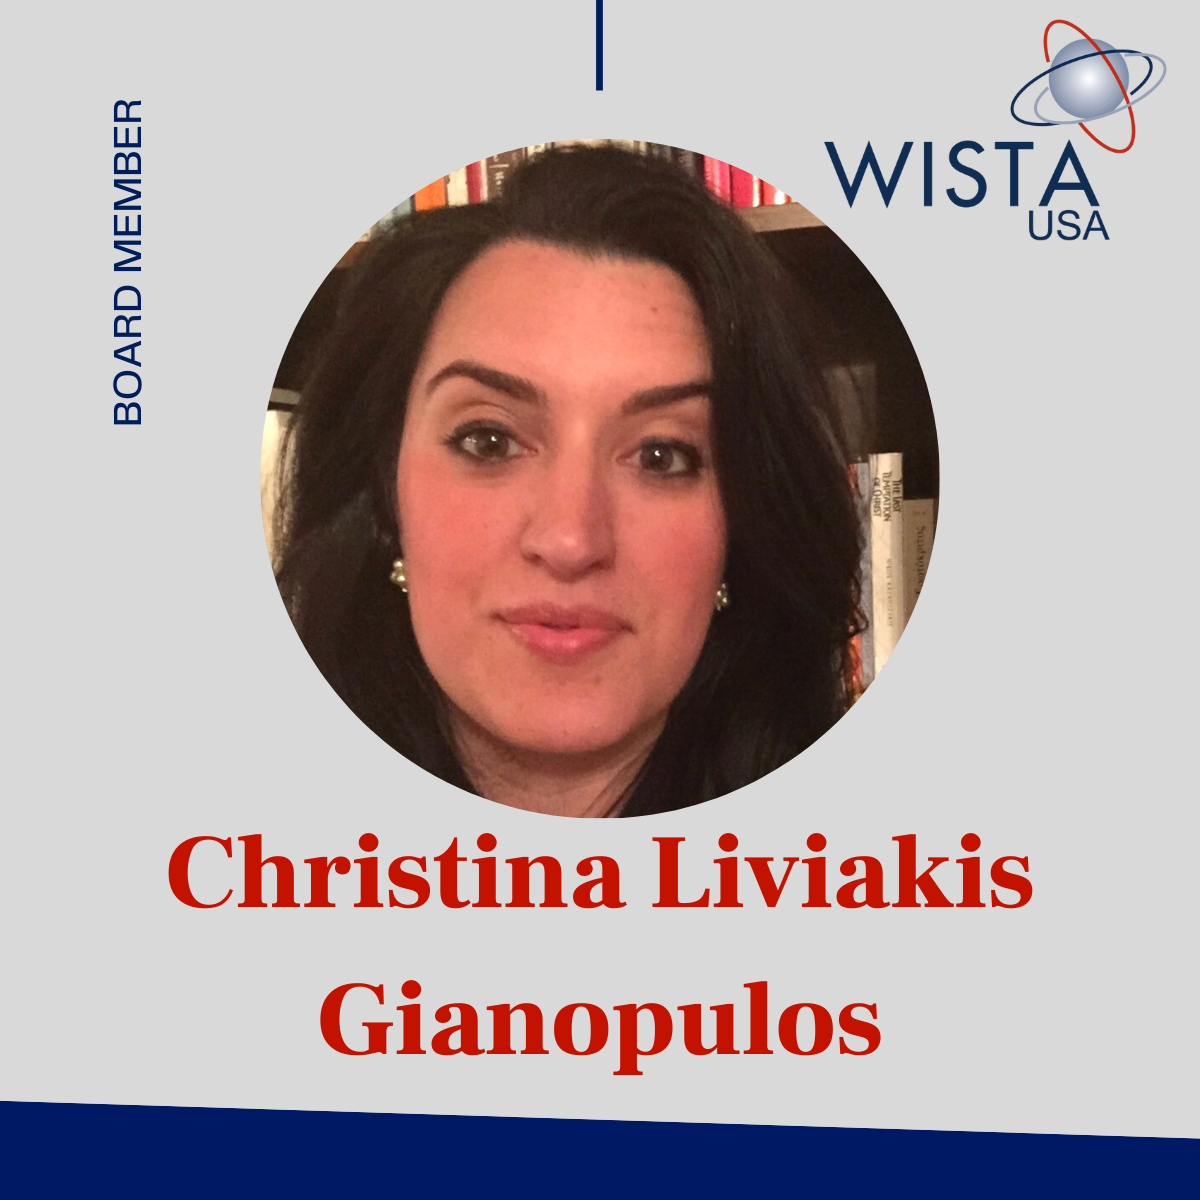 Christina Liviakis Gianopulos Elected to WISTA USA Board of Directors